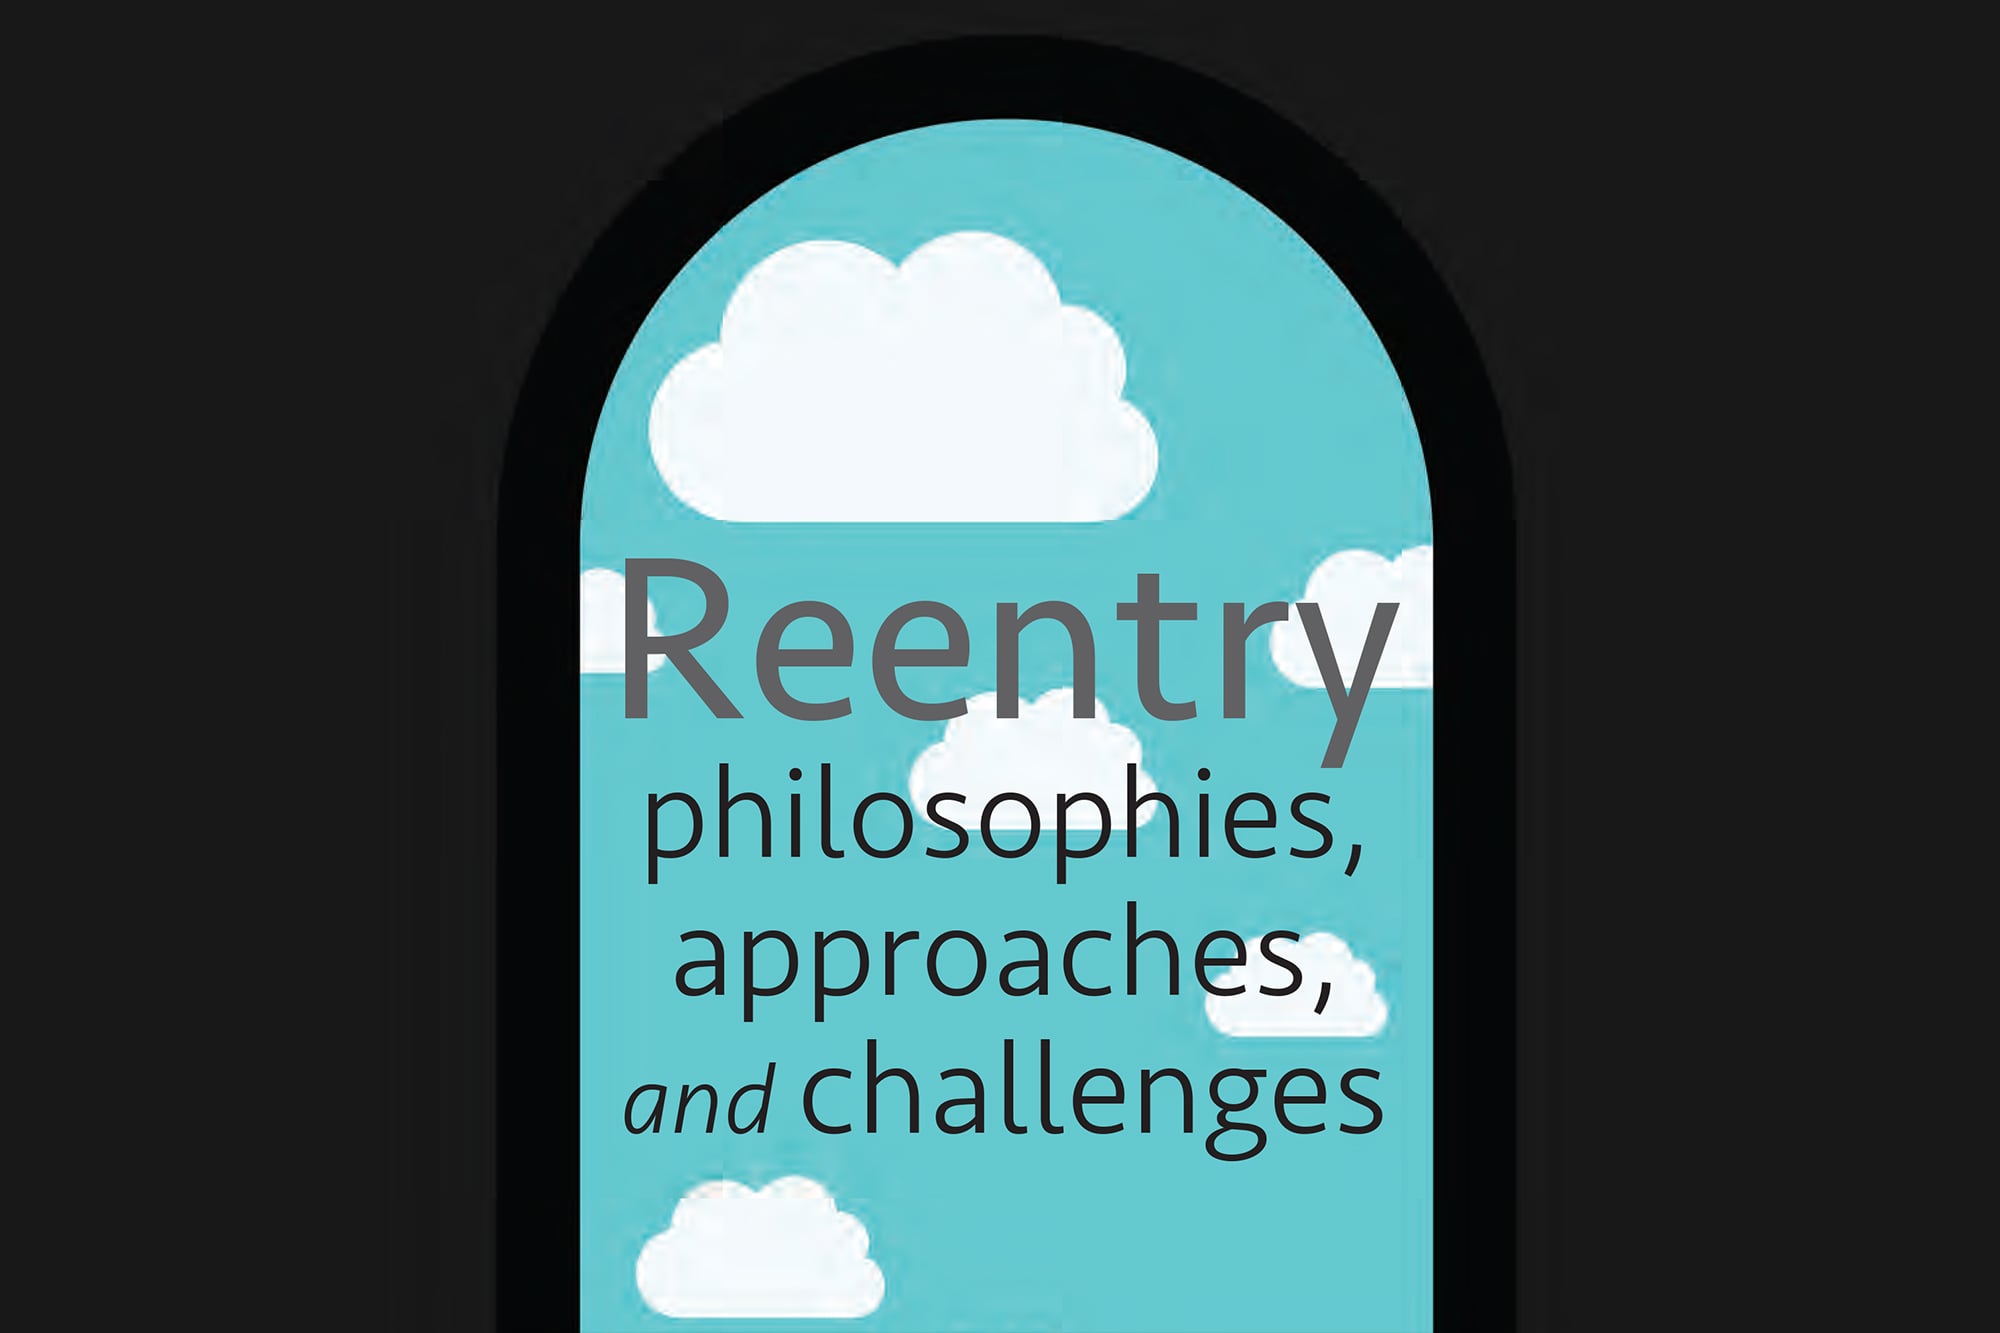 reentry philosophies, approaches, and challenges